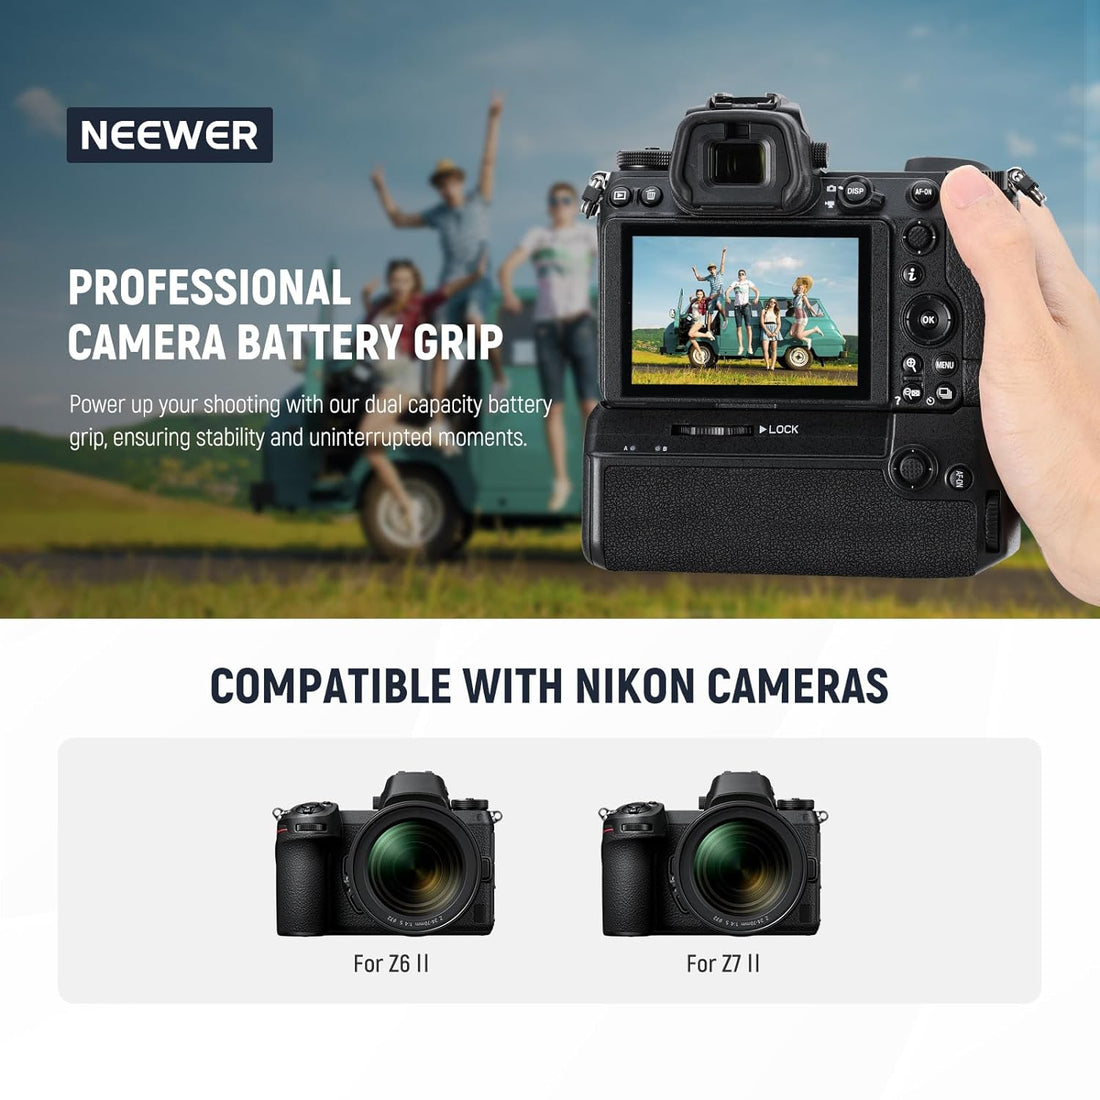 NEEWER MB-N11 Replacement Vertical Battery Grip with 2.4G Control, Compatible with Nikon Z6 II & Z7 II Camera and EN-EL15c/ EN-EL15b/ EN-EL15a/ EN-EL15 Battery (Batteries Not Included)